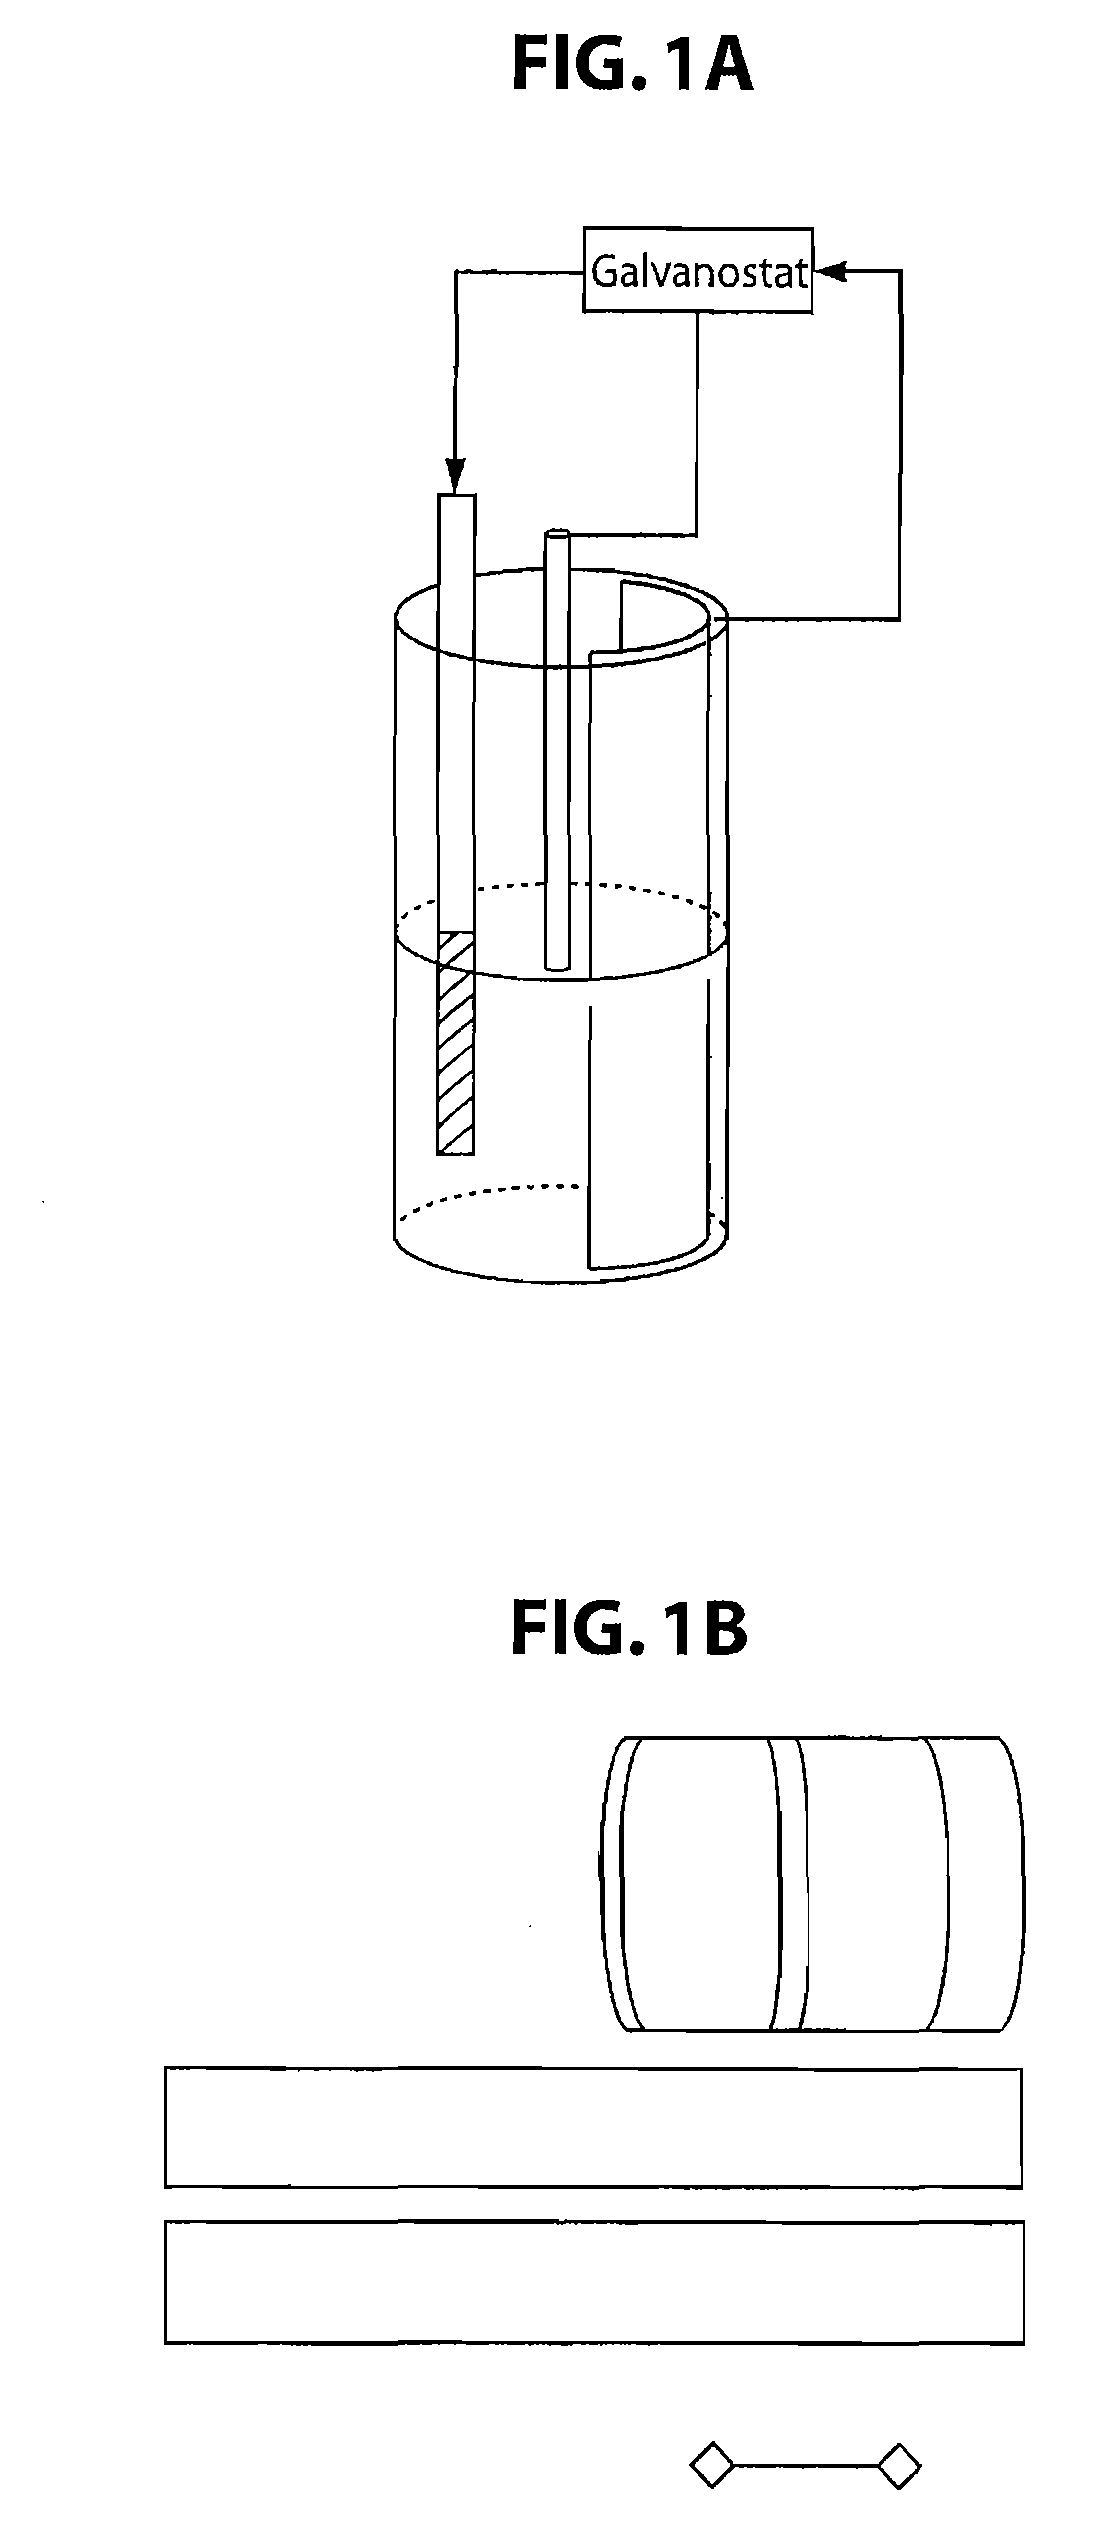 Conducting polymer nanowire brain-machine interface systems and methods